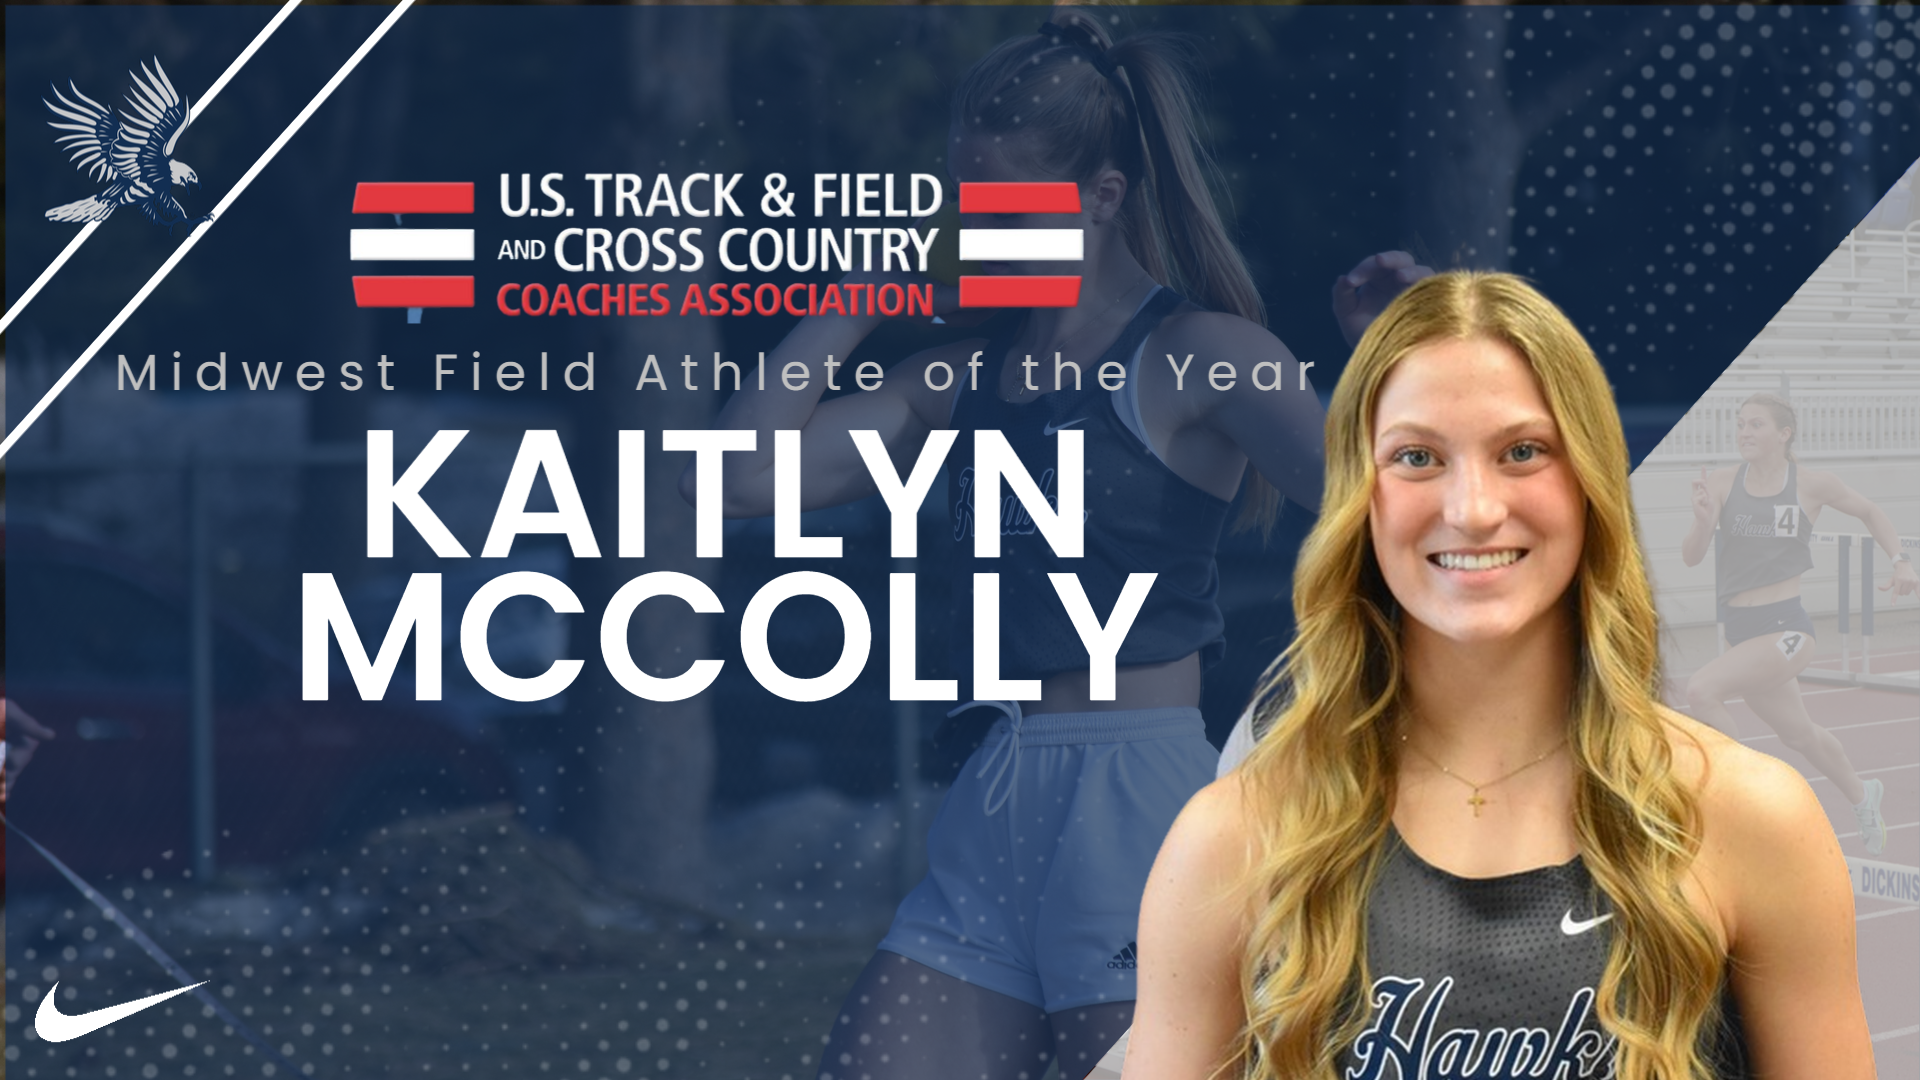 McColly named USTFCCA Midwest Field Athlete of the Year